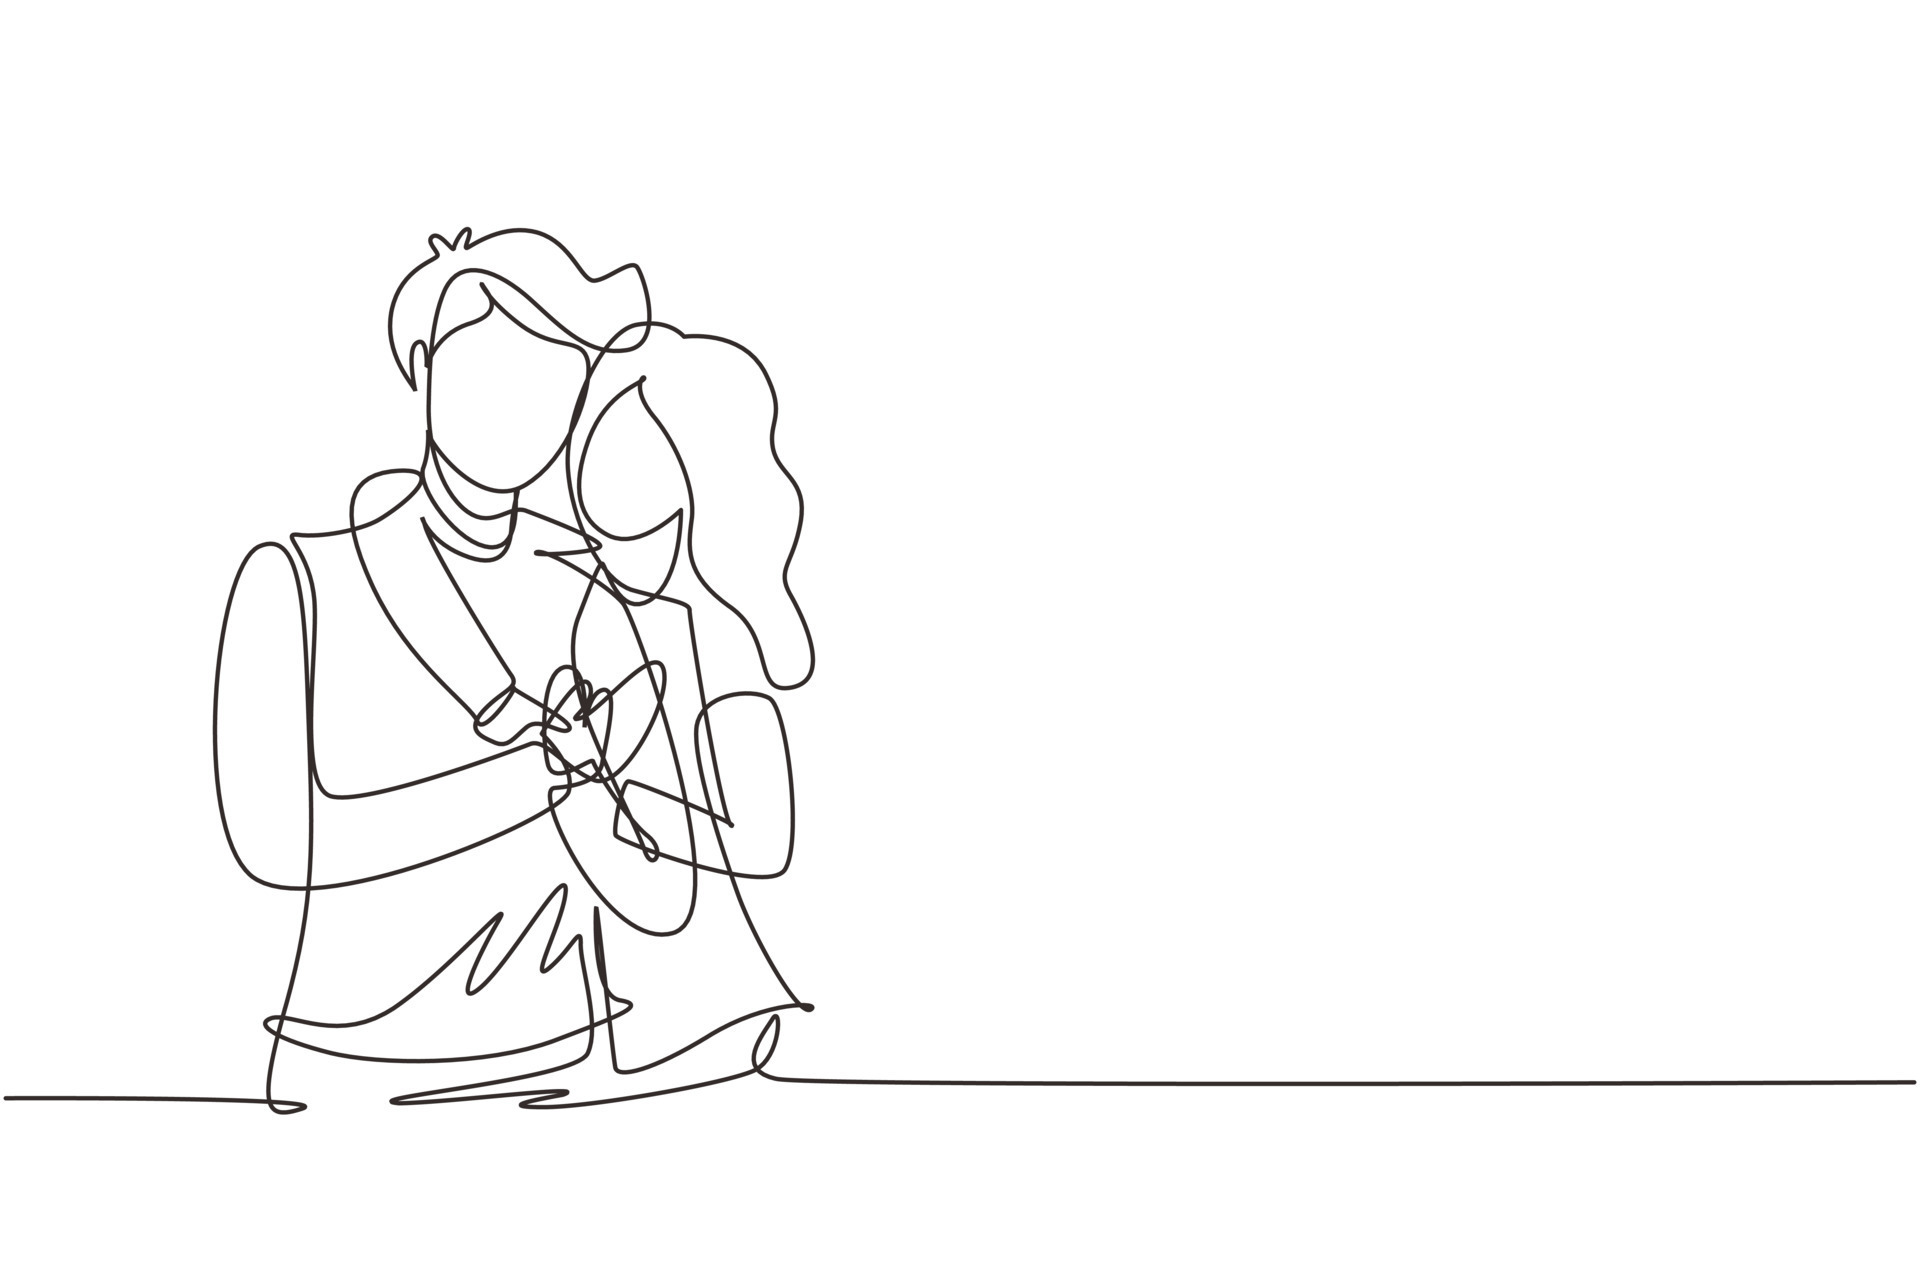 Contemporary Aesthetic Continuous Line Drawing, Romantic Couple